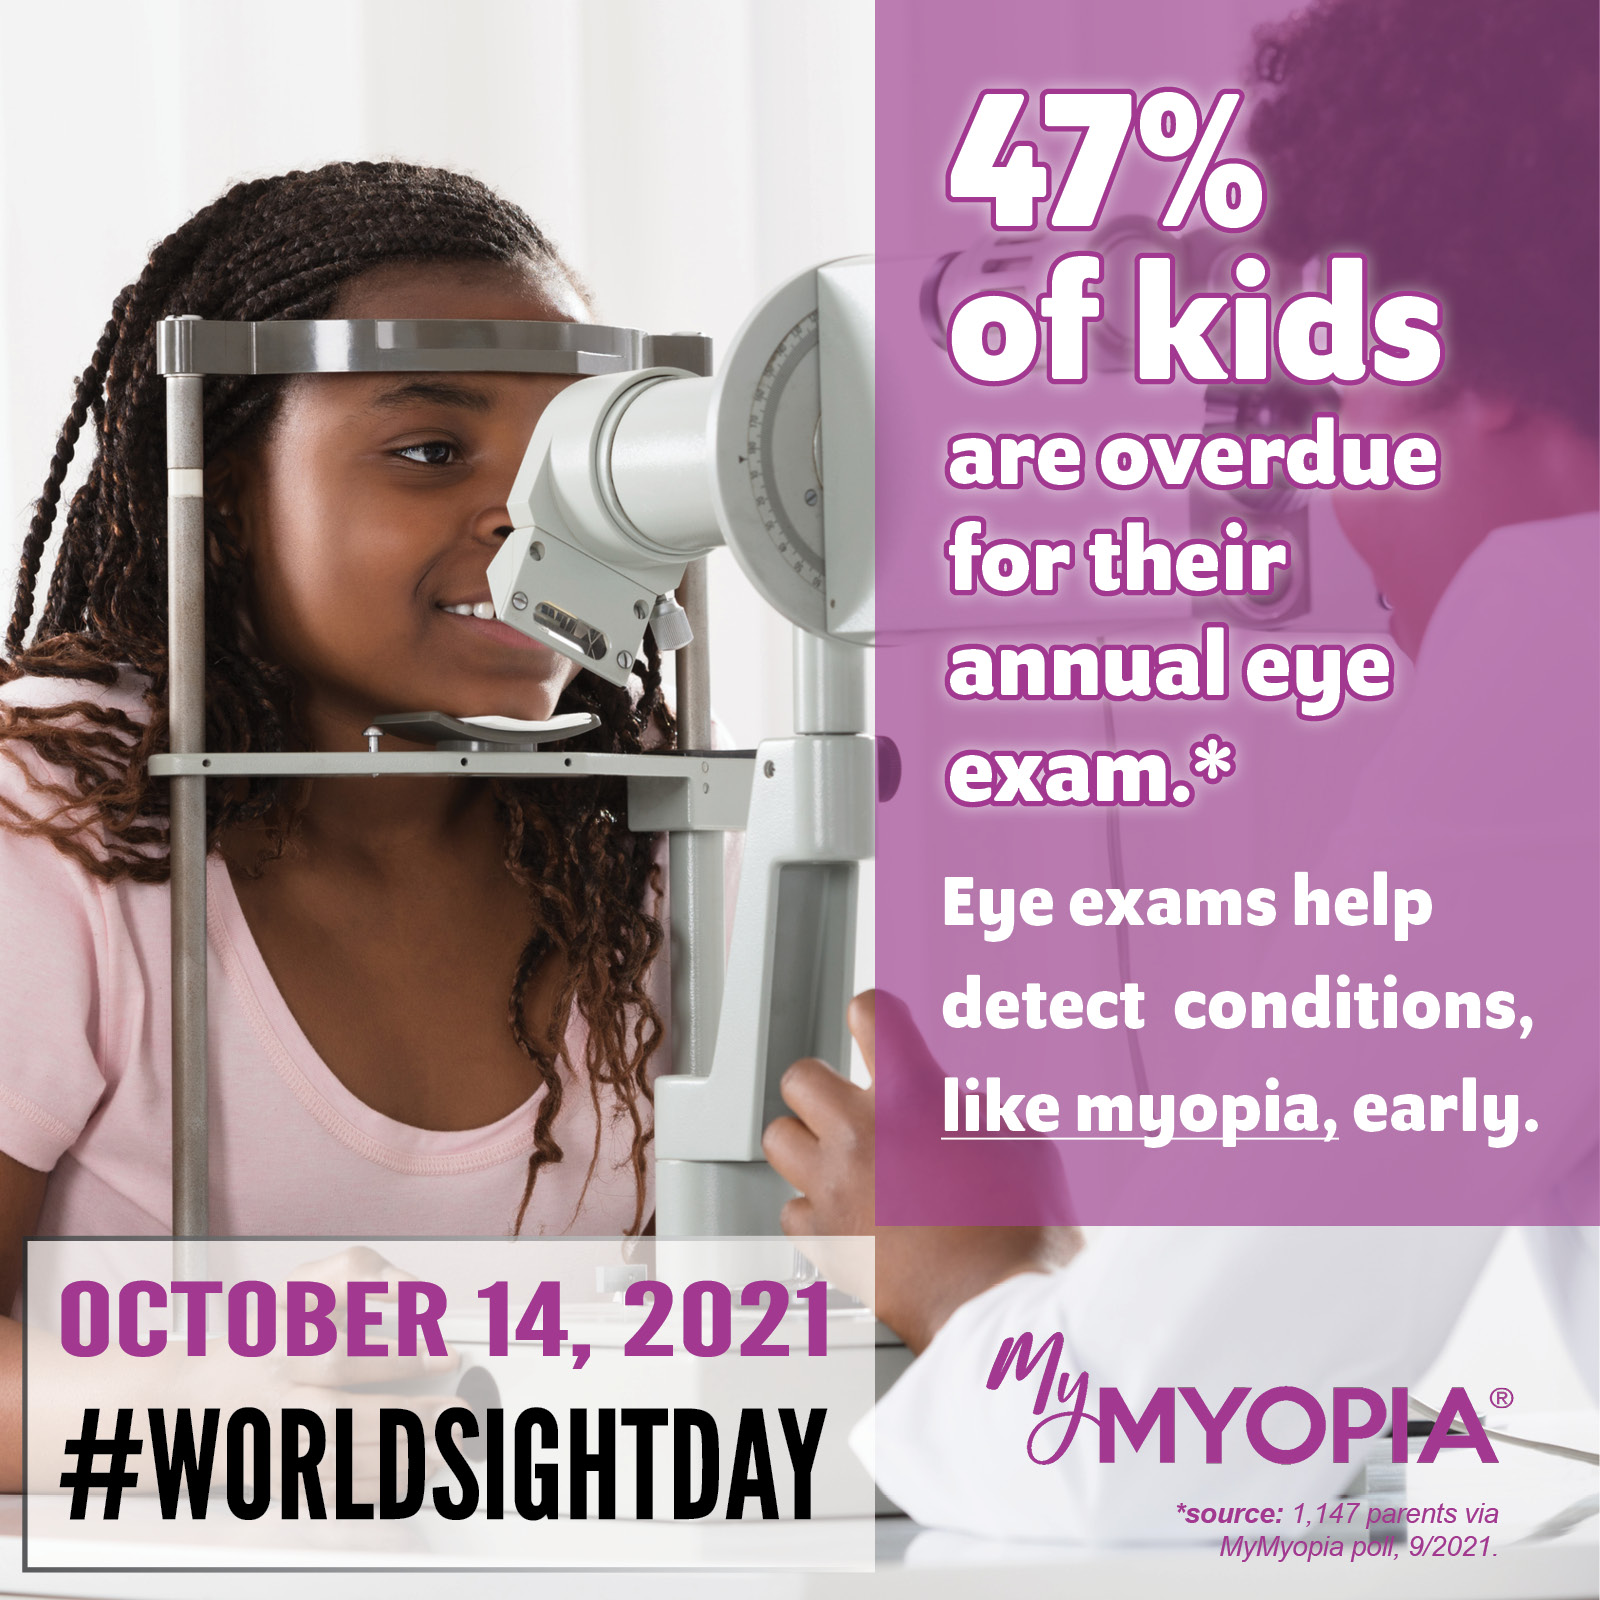 47% of kids are overdue for their annual eye exam